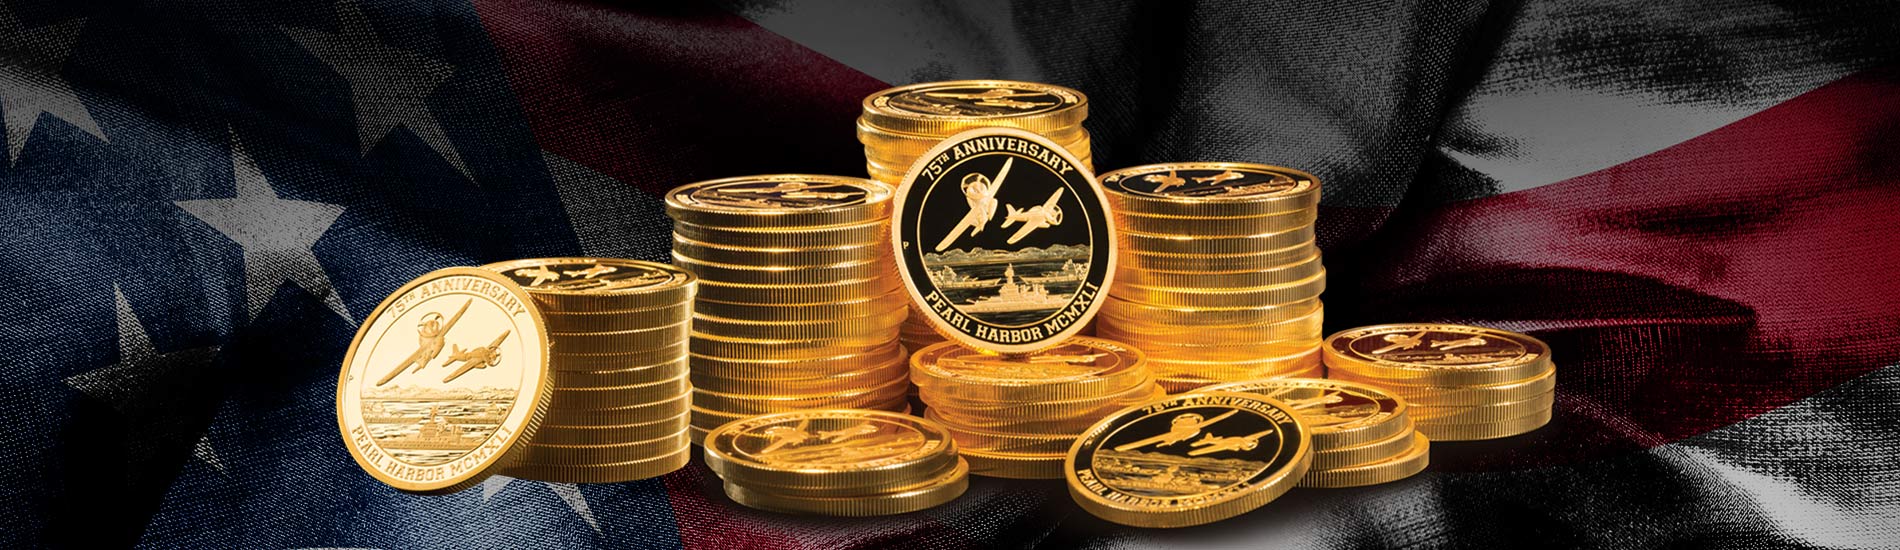 Pearl Harbor Gold Coins spread against American flag